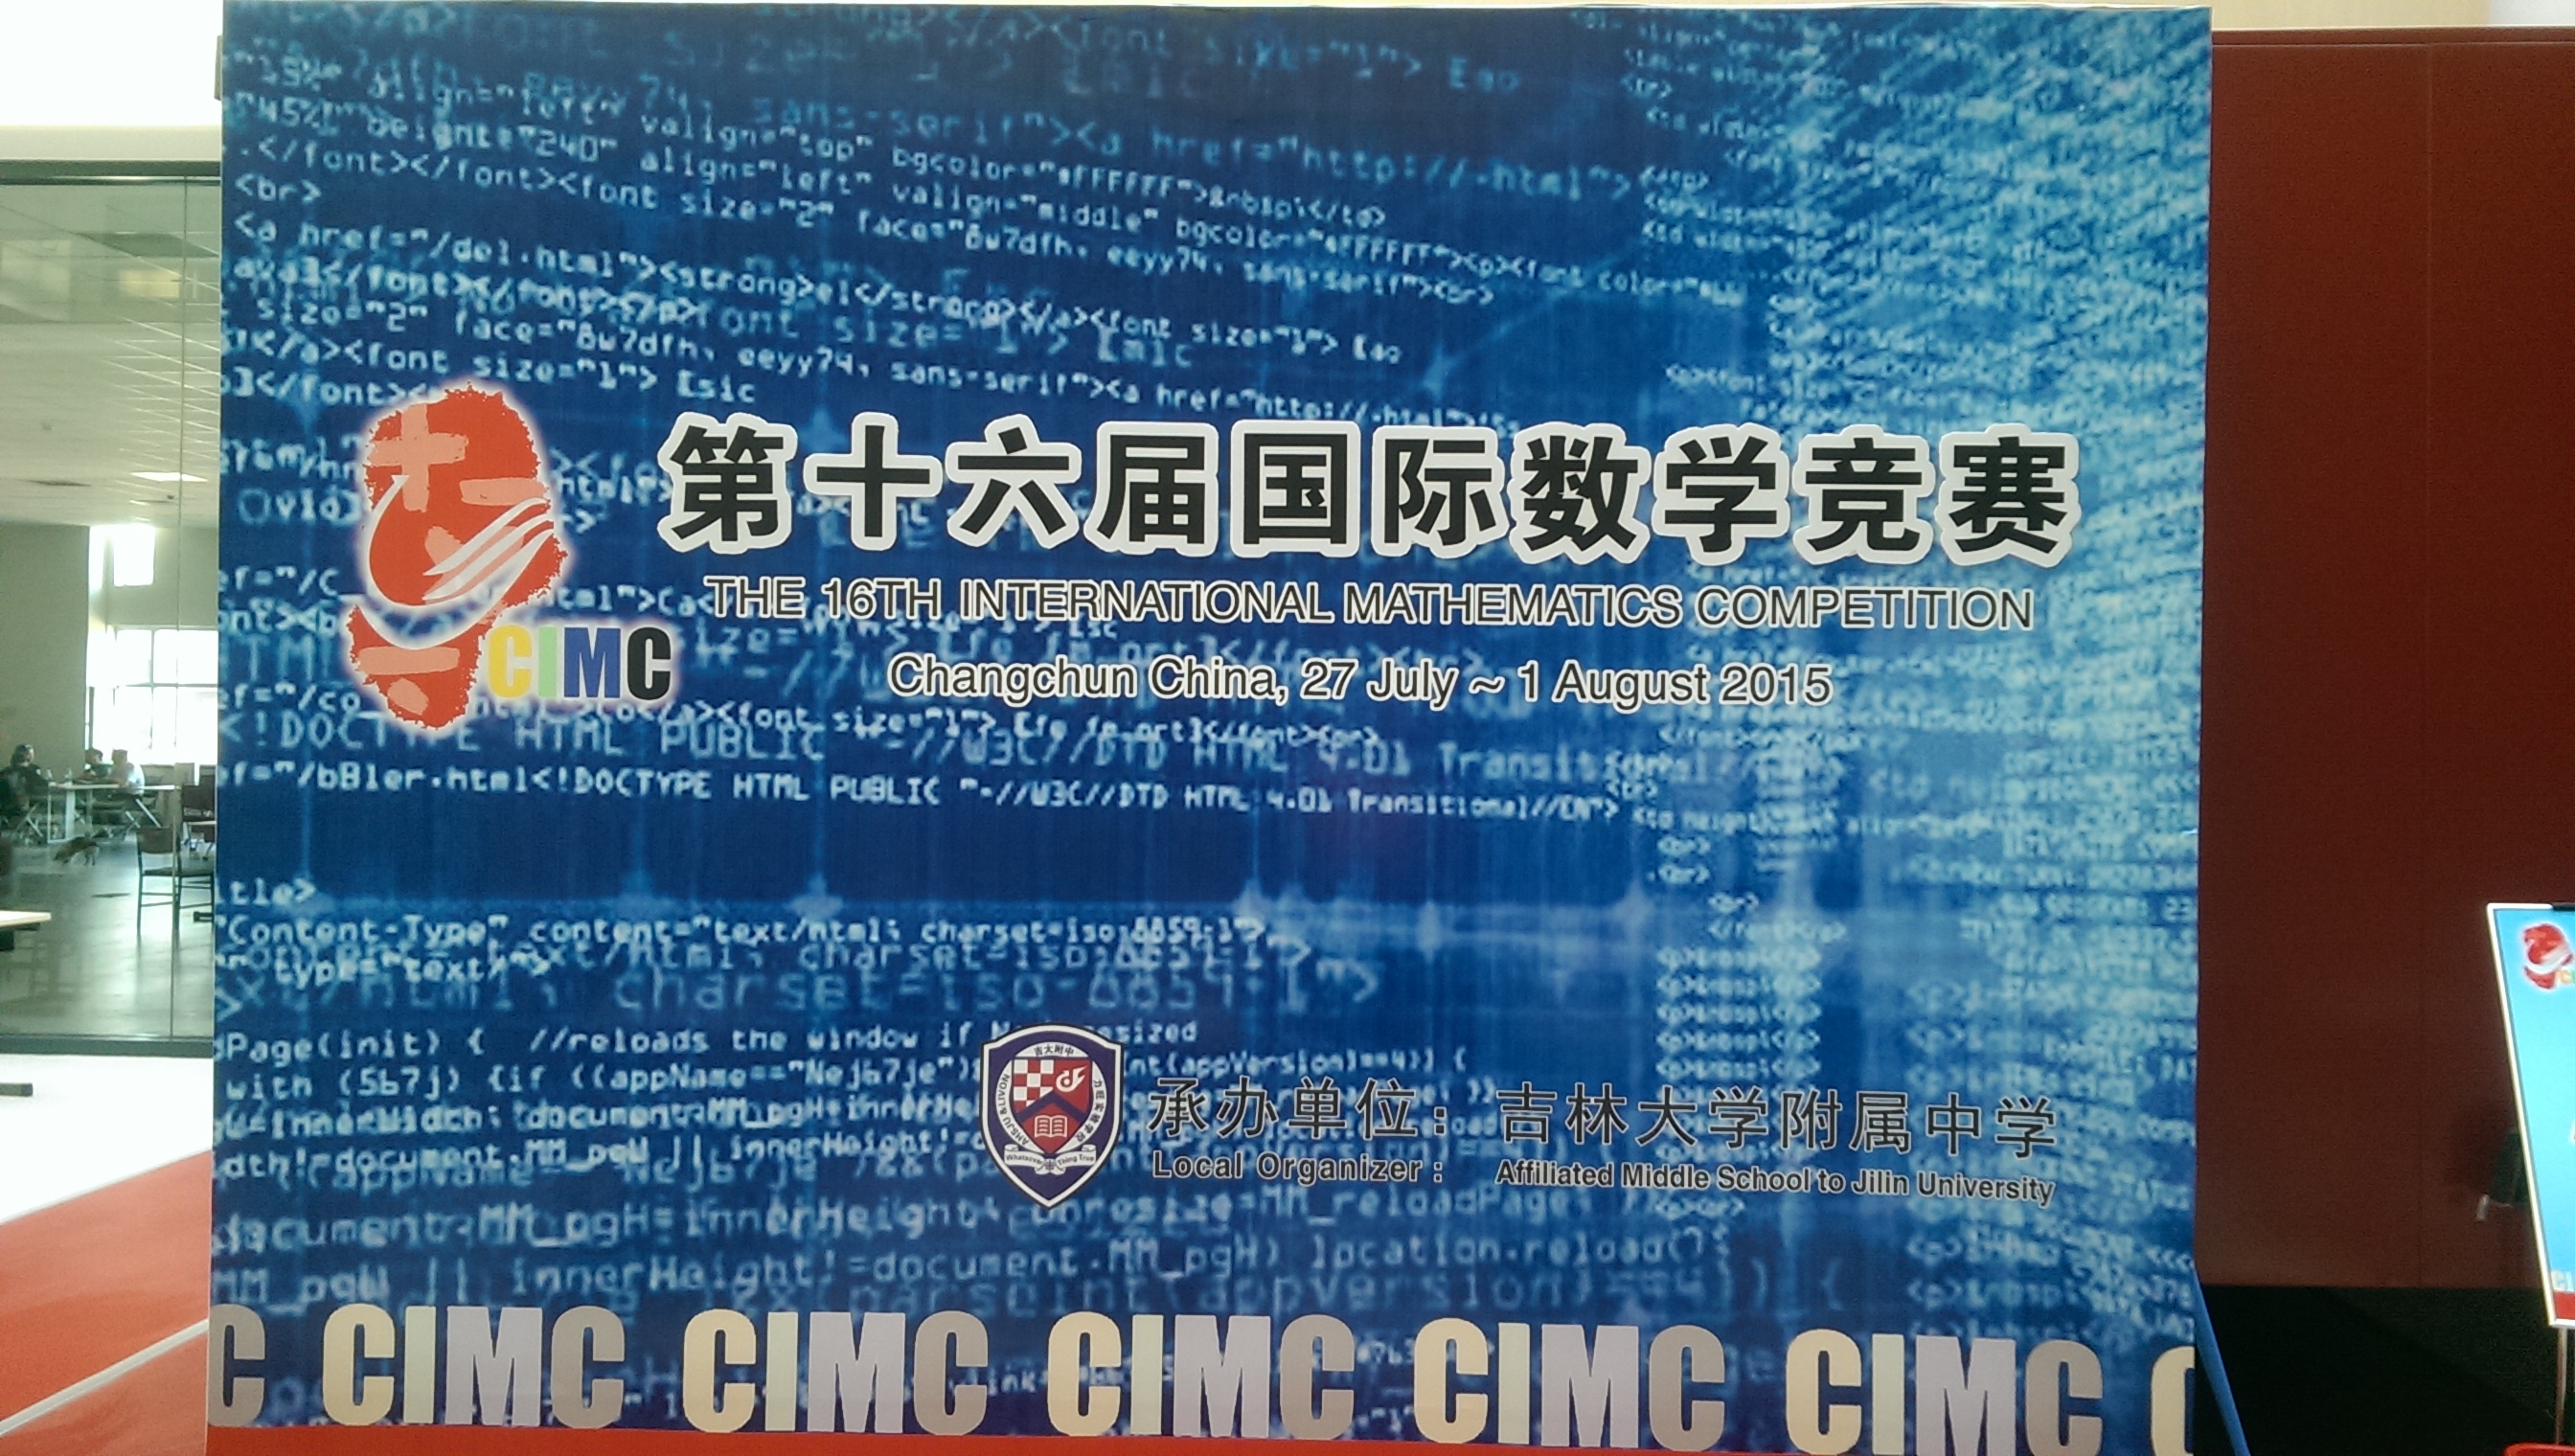 [Blue CIMC background, featuring horrible deprecated HTML]